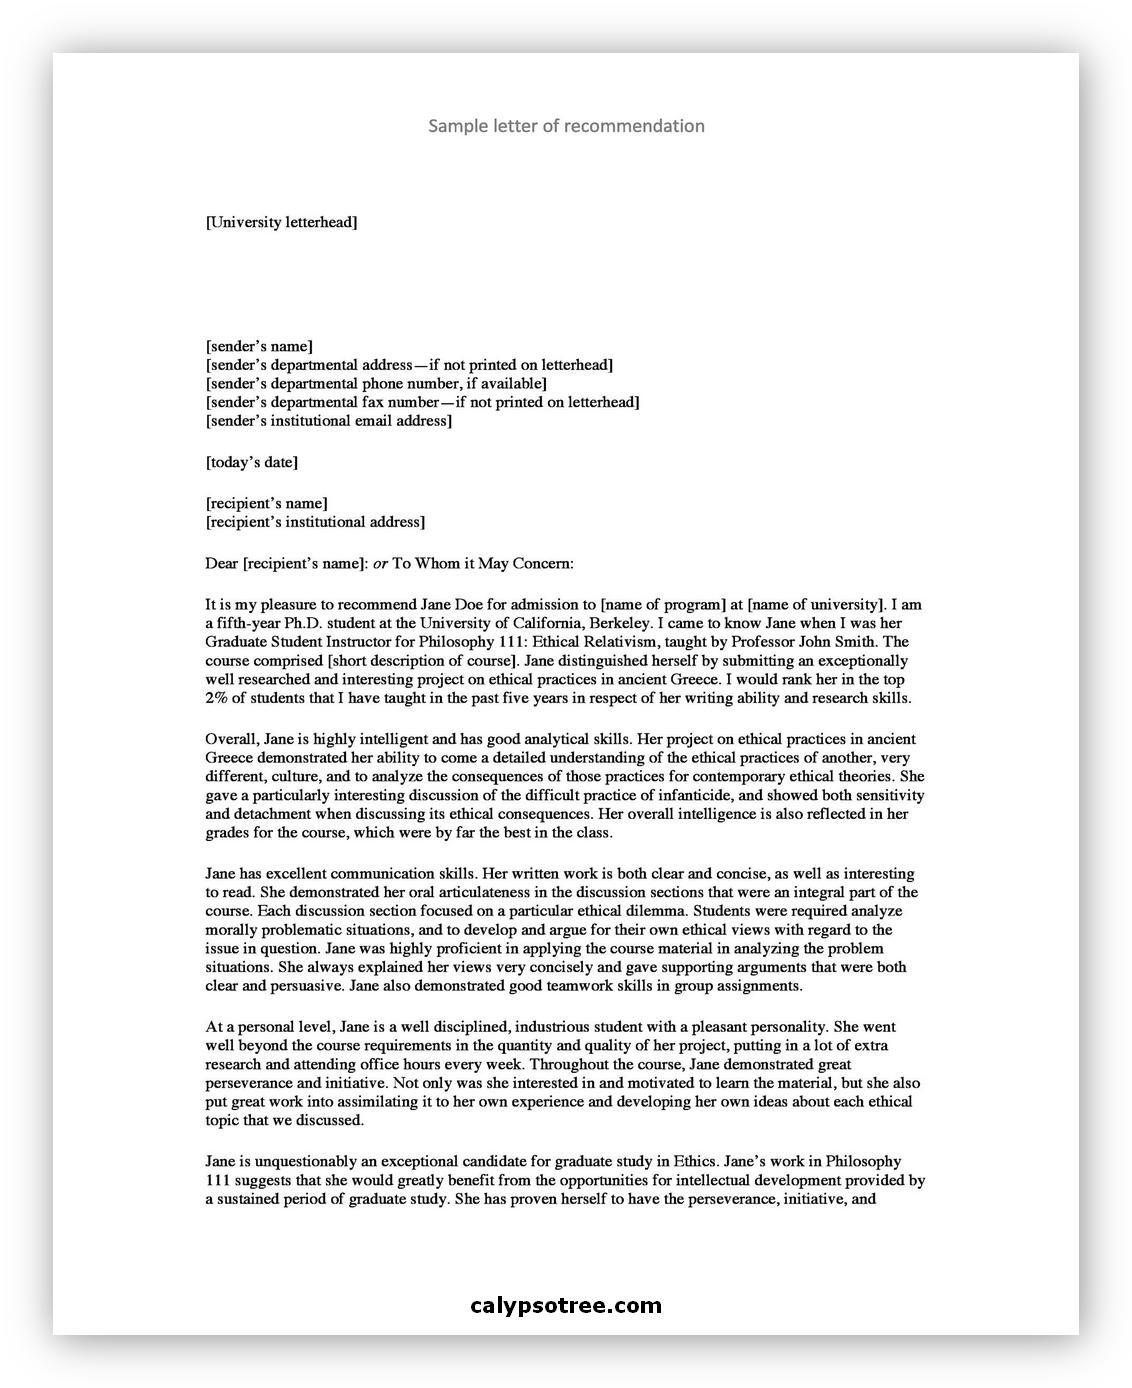 Letter of Recommendation Sample 03